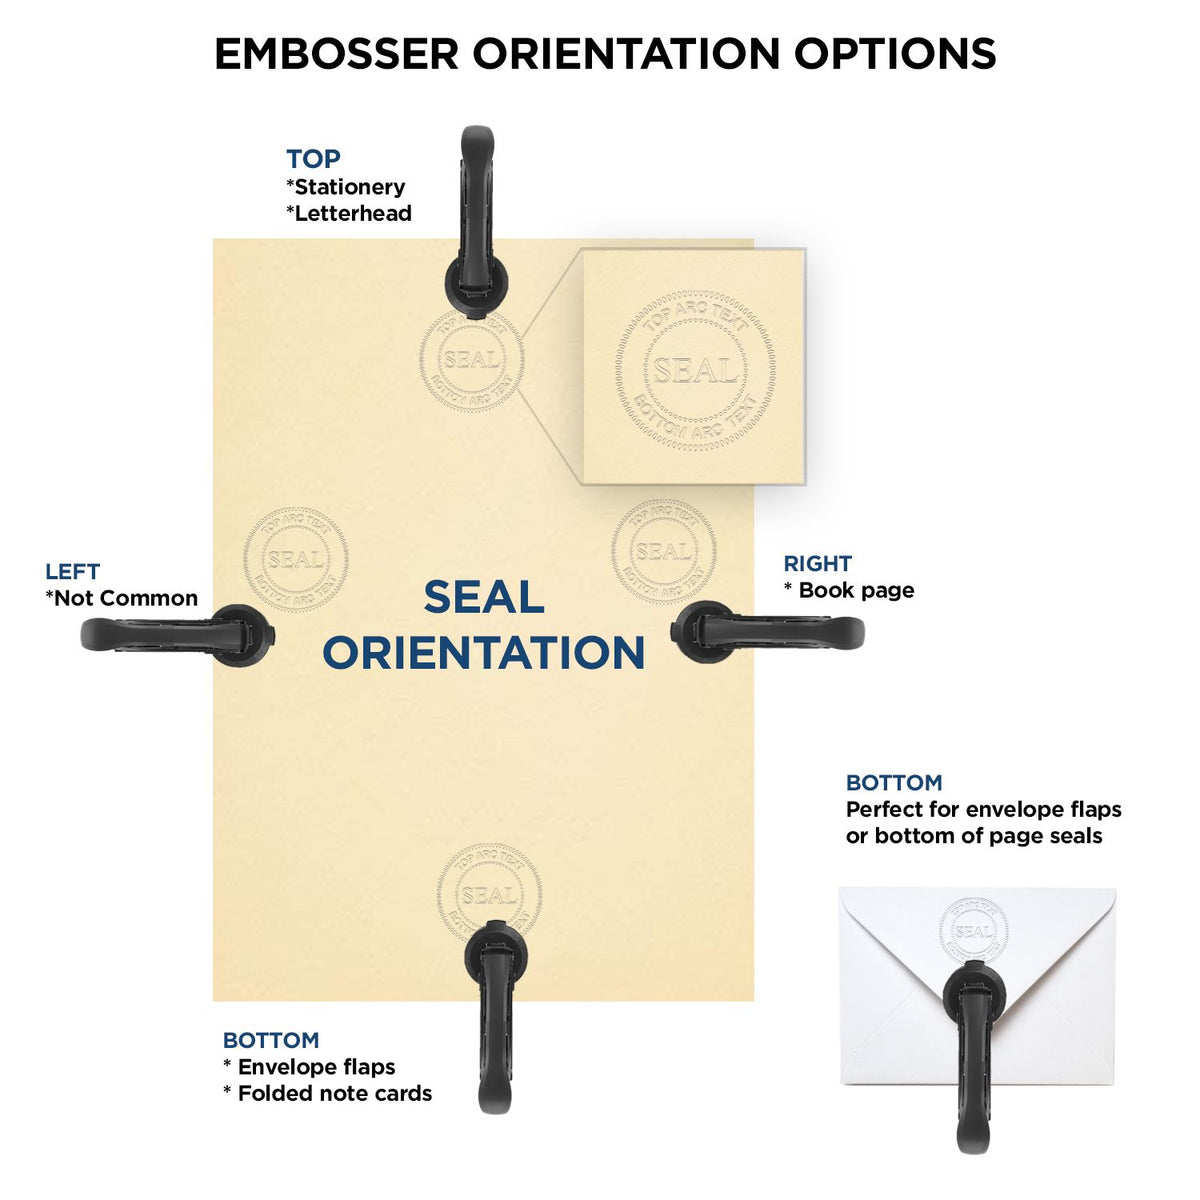 An infographic for the Gift Montana Engineer Seal showing embosser orientation, this is showing examples of a top, bottom, right and left insert.